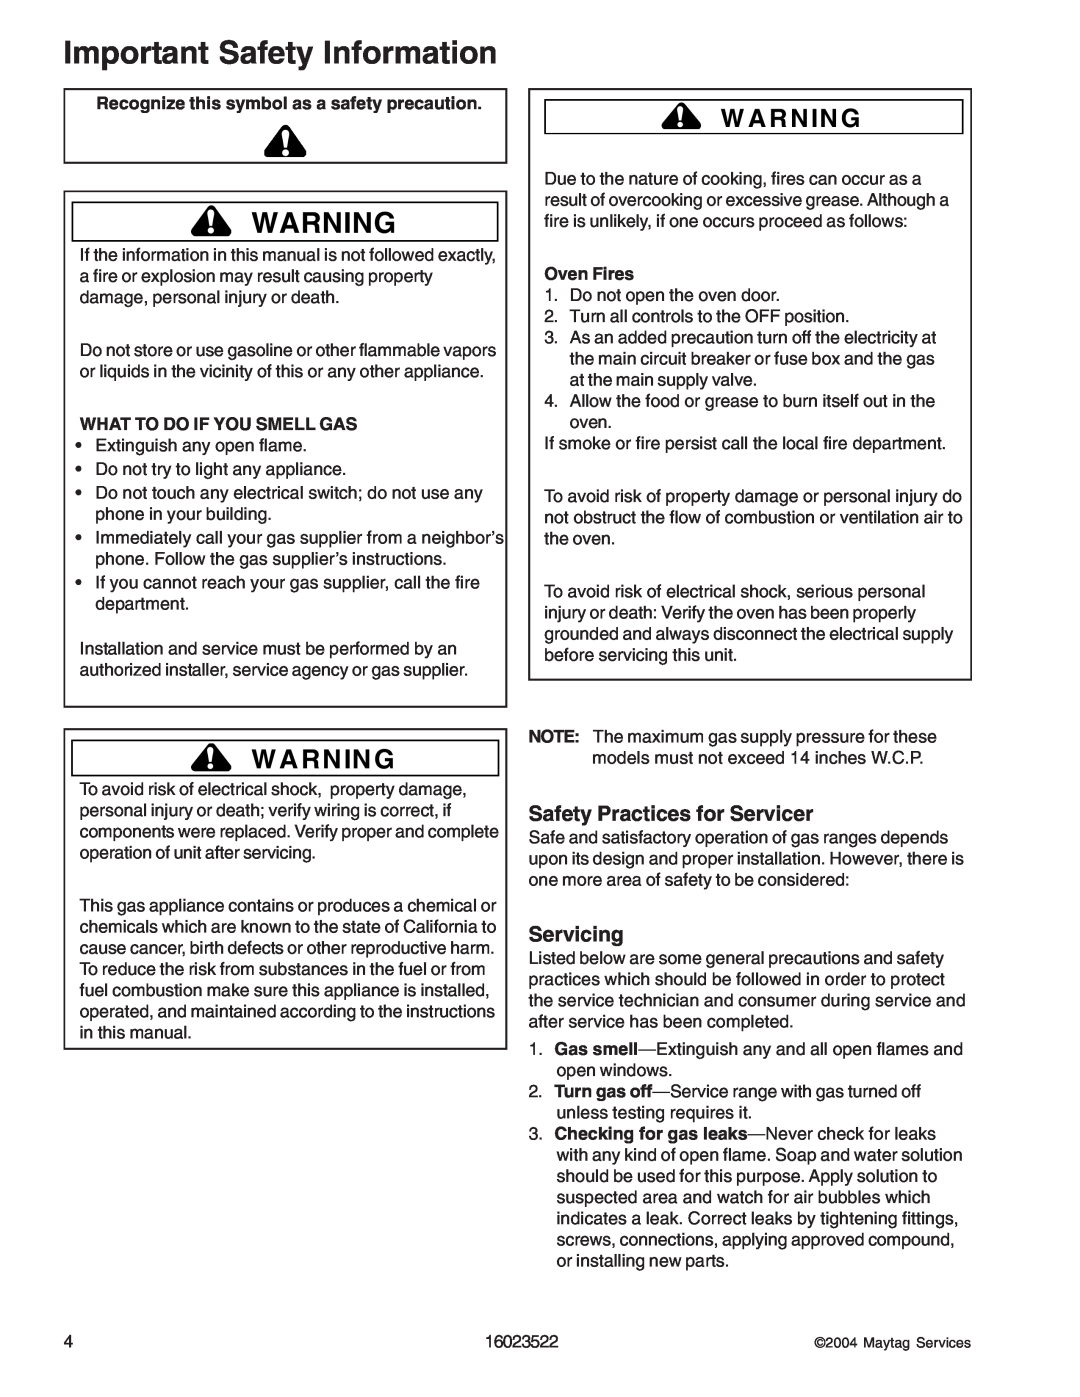 Maytag CGR1125ADQ/W manual Important Safety Information, W A R Nin G, Safety Practices for Servicer, Servicing, Oven Fires 